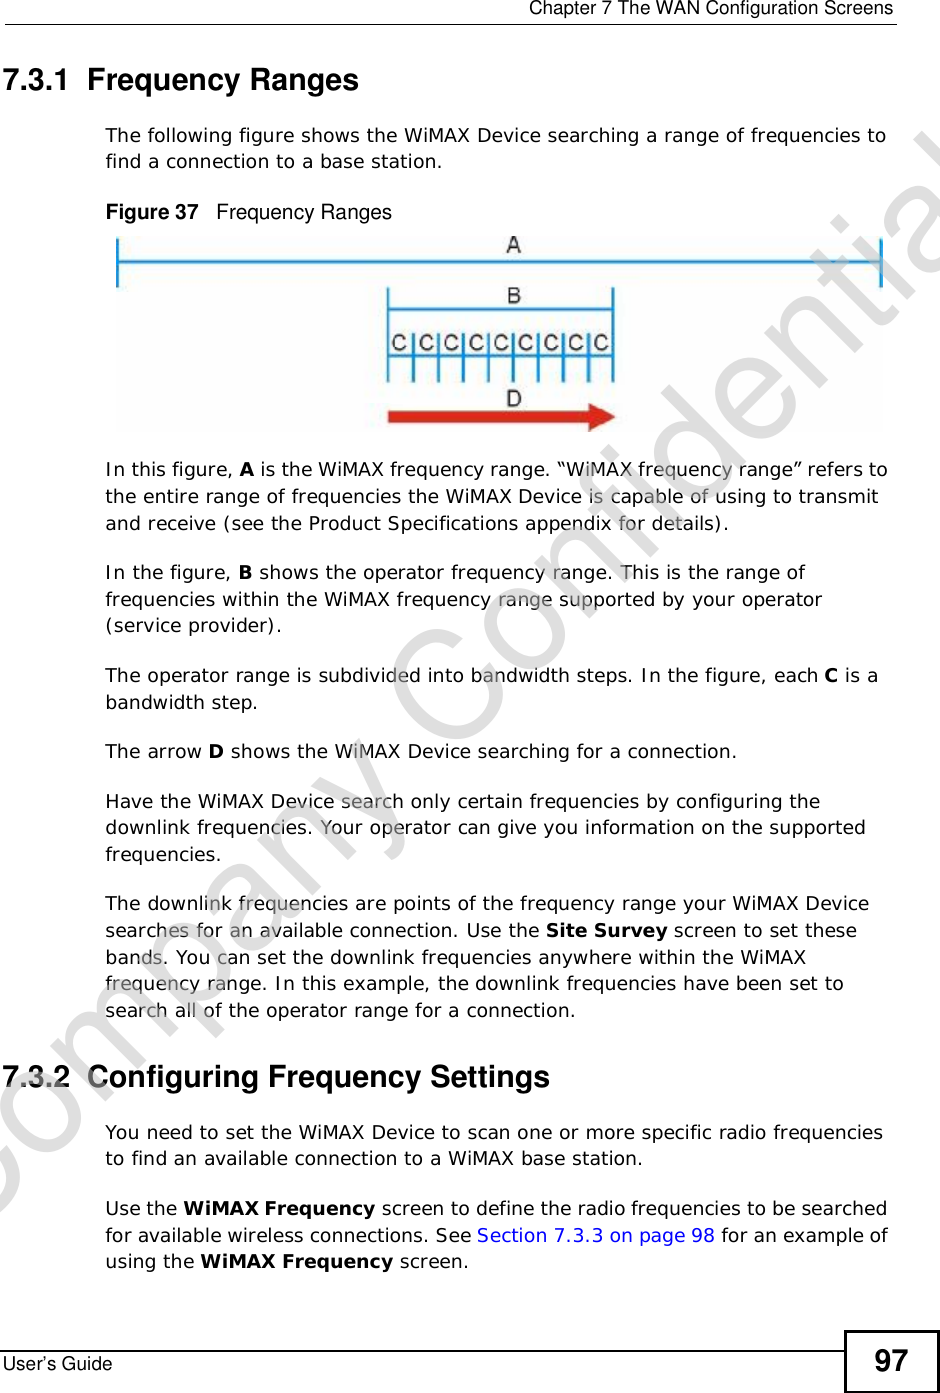  Chapter 7The WAN Configuration ScreensUser’s Guide 977.3.1  Frequency RangesThe following figure shows the WiMAX Device searching a range of frequencies to find a connection to a base station. Figure 37   Frequency RangesIn this figure, A is the WiMAX frequency range. “WiMAX frequency range” refers to the entire range of frequencies the WiMAX Device is capable of using to transmit and receive (see the Product Specifications appendix for details). In the figure, B shows the operator frequency range. This is the range of frequencies within the WiMAX frequency range supported by your operator (service provider).The operator range is subdivided into bandwidth steps. In the figure, each C is a bandwidth step.The arrow D shows the WiMAX Device searching for a connection.Have the WiMAX Device search only certain frequencies by configuring the downlink frequencies. Your operator can give you information on the supported frequencies. The downlink frequencies are points of the frequency range your WiMAX Device searches for an available connection. Use the Site Survey screen to set these bands. You can set the downlink frequencies anywhere within the WiMAX frequency range. In this example, the downlink frequencies have been set to search all of the operator range for a connection.7.3.2  Configuring Frequency SettingsYou need to set the WiMAX Device to scan one or more specific radio frequencies to find an available connection to a WiMAX base station. Use the WiMAX Frequency screen to define the radio frequencies to be searched for available wireless connections. See Section 7.3.3 on page 98 for an example of using the WiMAX Frequency screen.Company Confidential